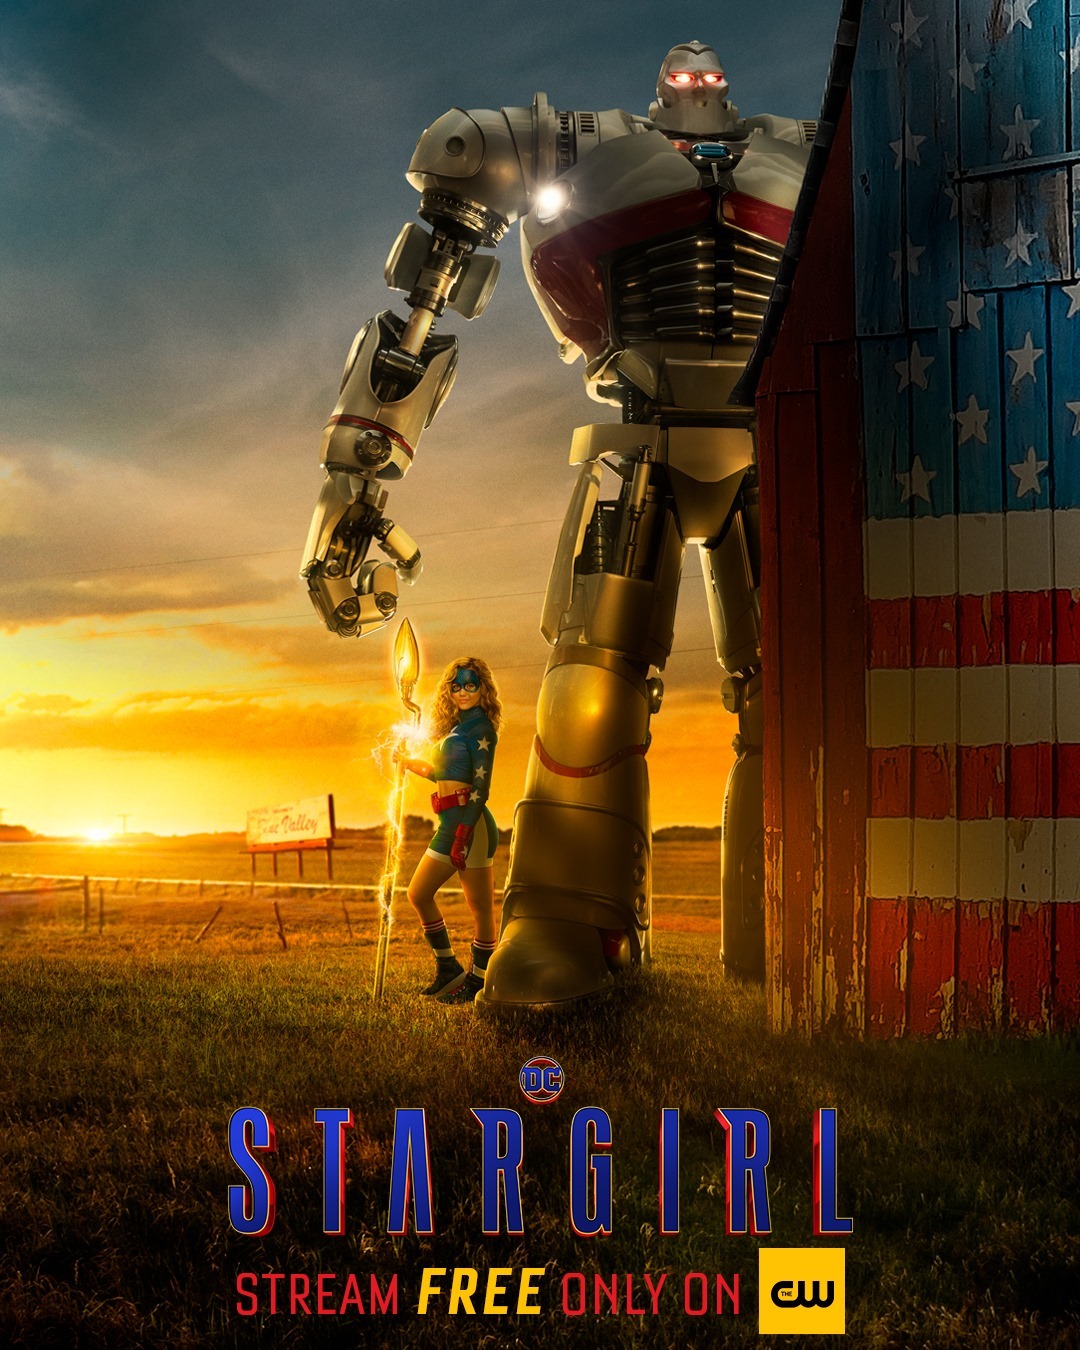 Extra Large TV Poster Image for Stargirl (#4 of 23)